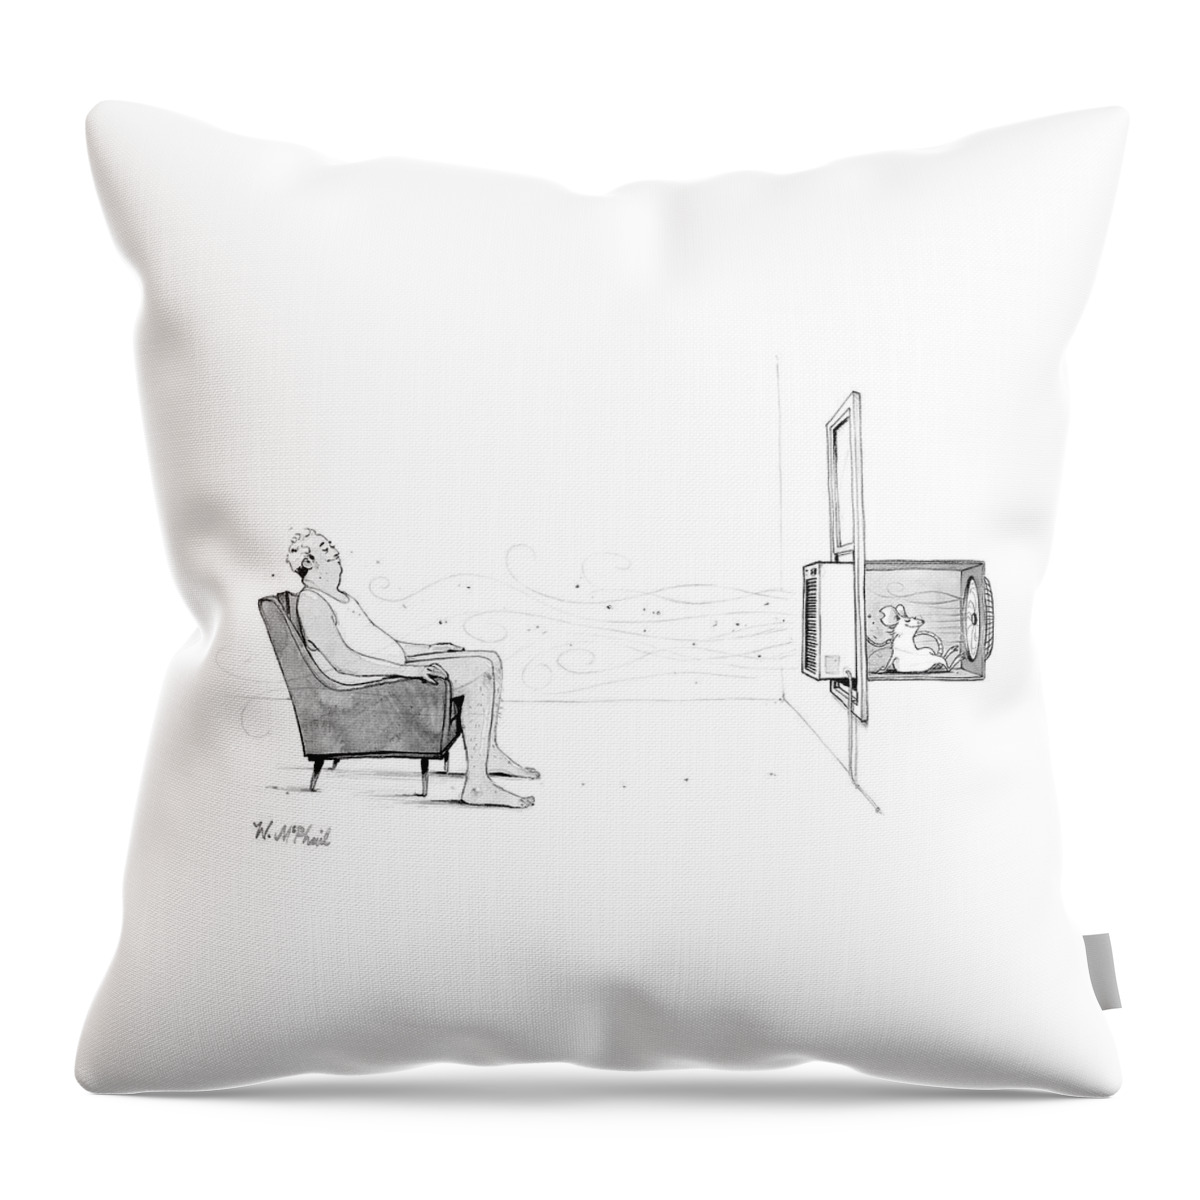 New Yorker July 10, 2023 Throw Pillow